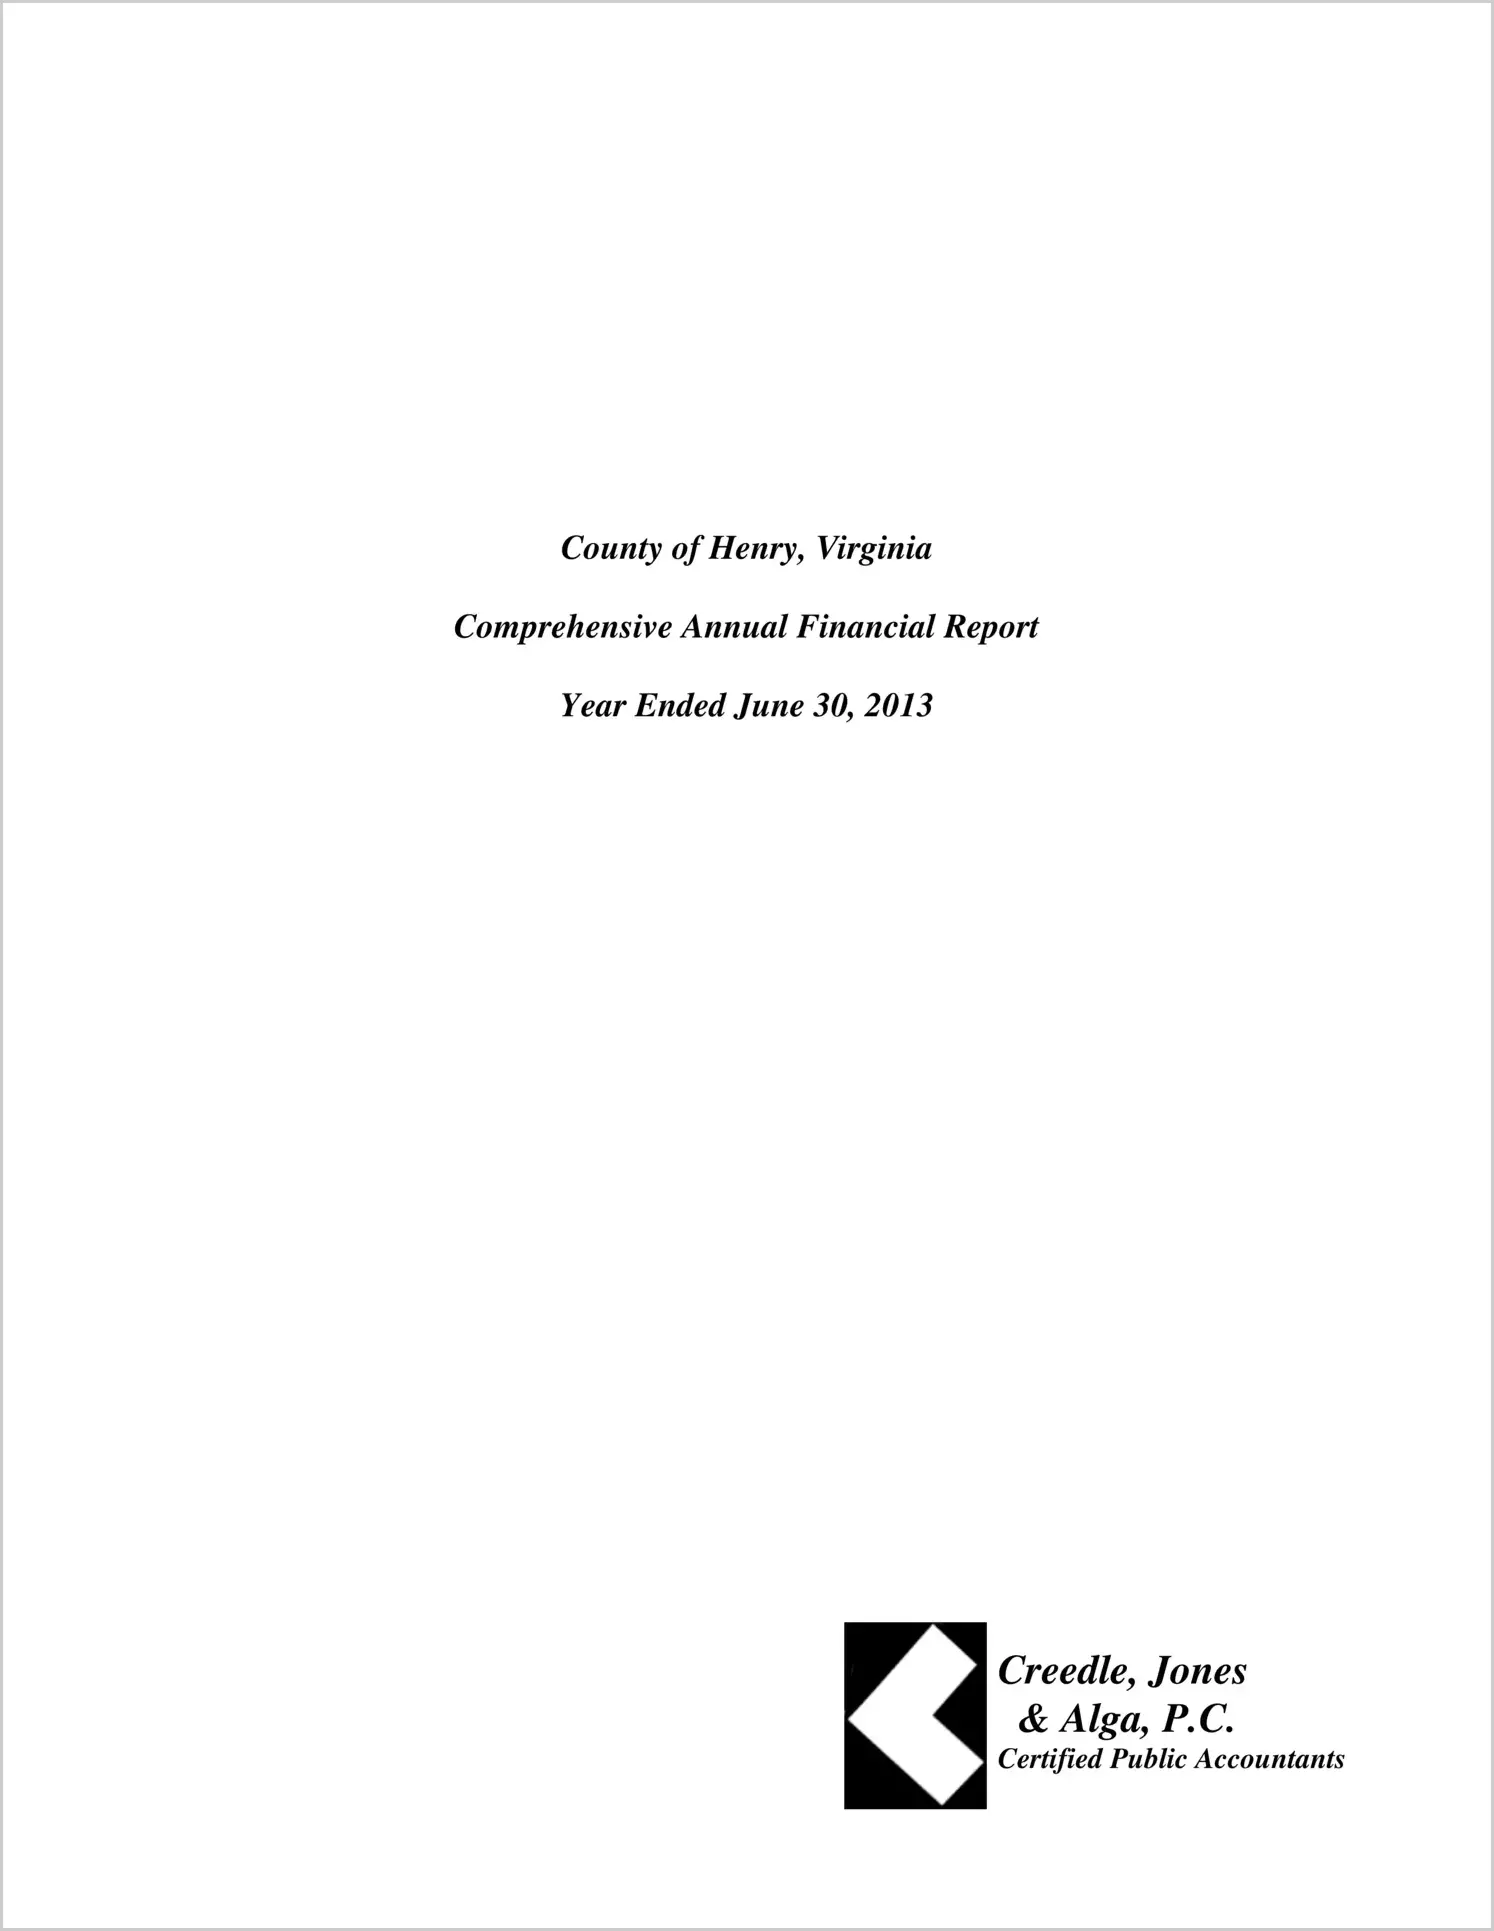 2013 Annual Financial Report for County of Henry